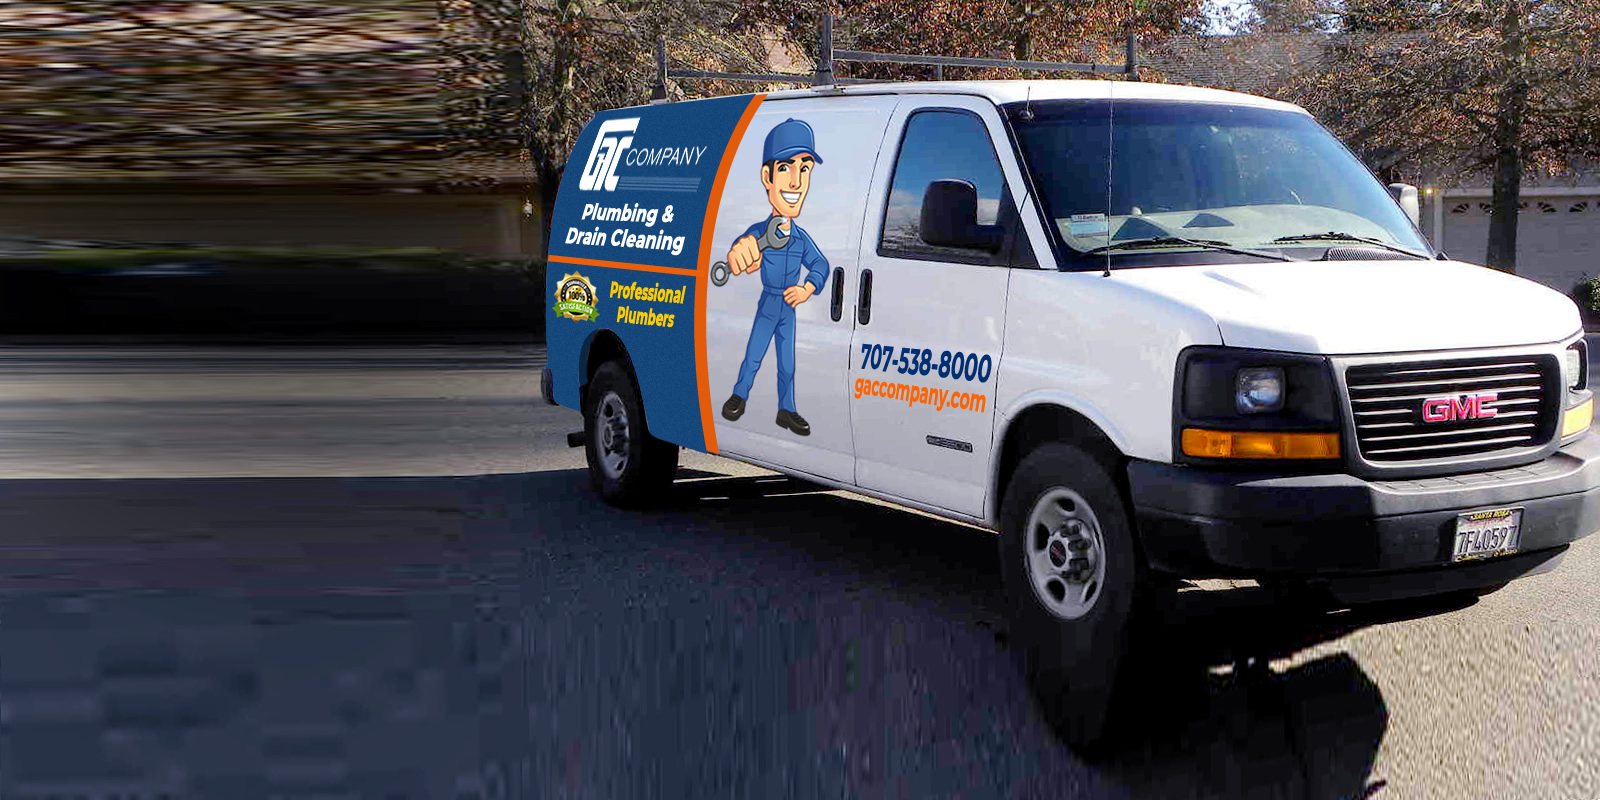 Best Plumbing & Drain Cleaning Services in Santa Rosa